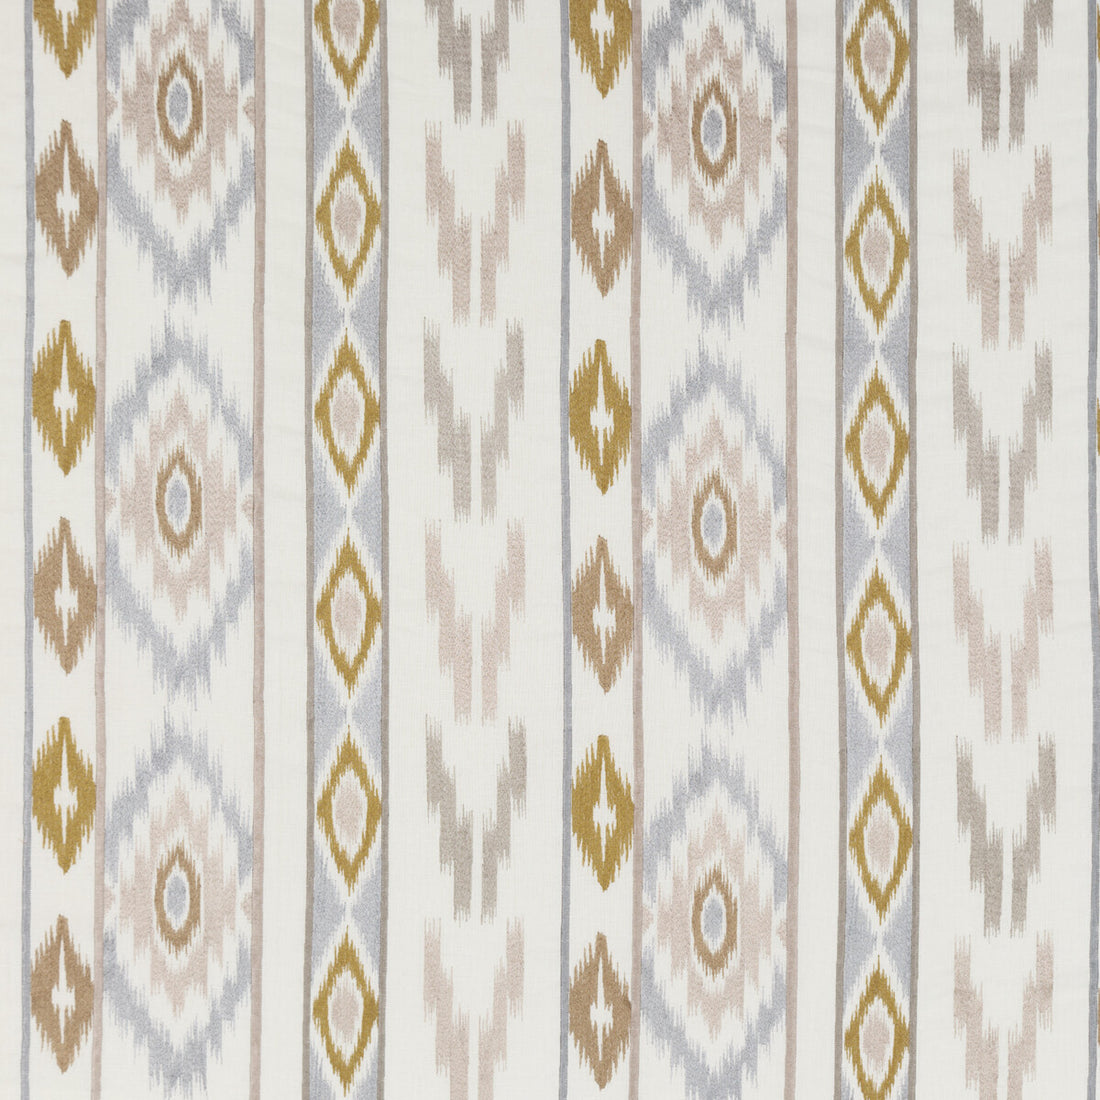 Samba fabric in cashew/stone color - pattern PF50428.3.0 - by Baker Lifestyle in the Carnival collection